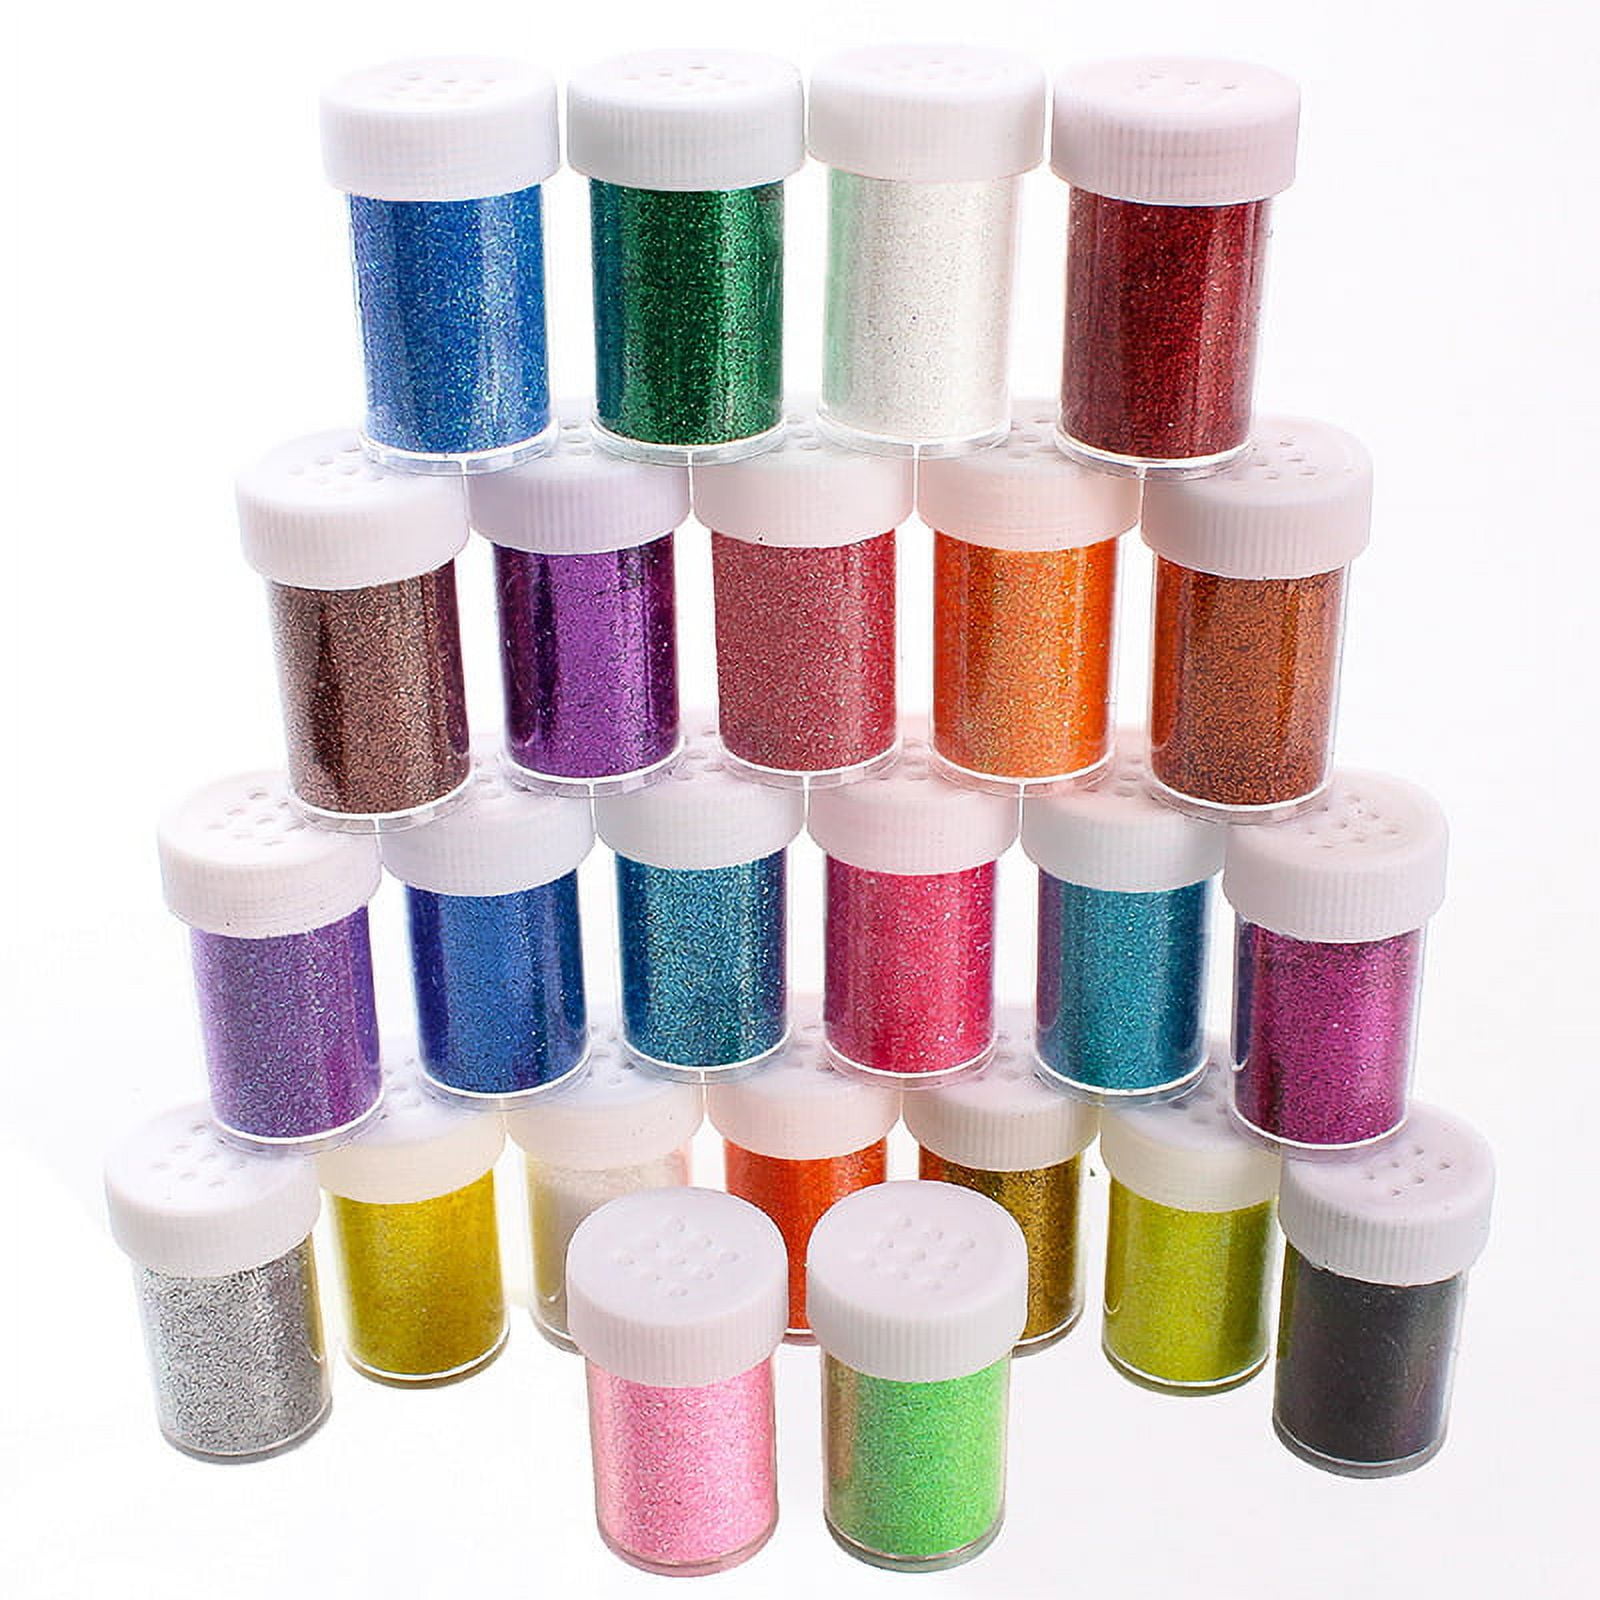 Colorations® Plastic Glitter Pack, Great for Arts and Crafts, Painting,  Scrapbooking, Slime, Holiday Parties and More, Each Color Comes in a 3/4  oz.